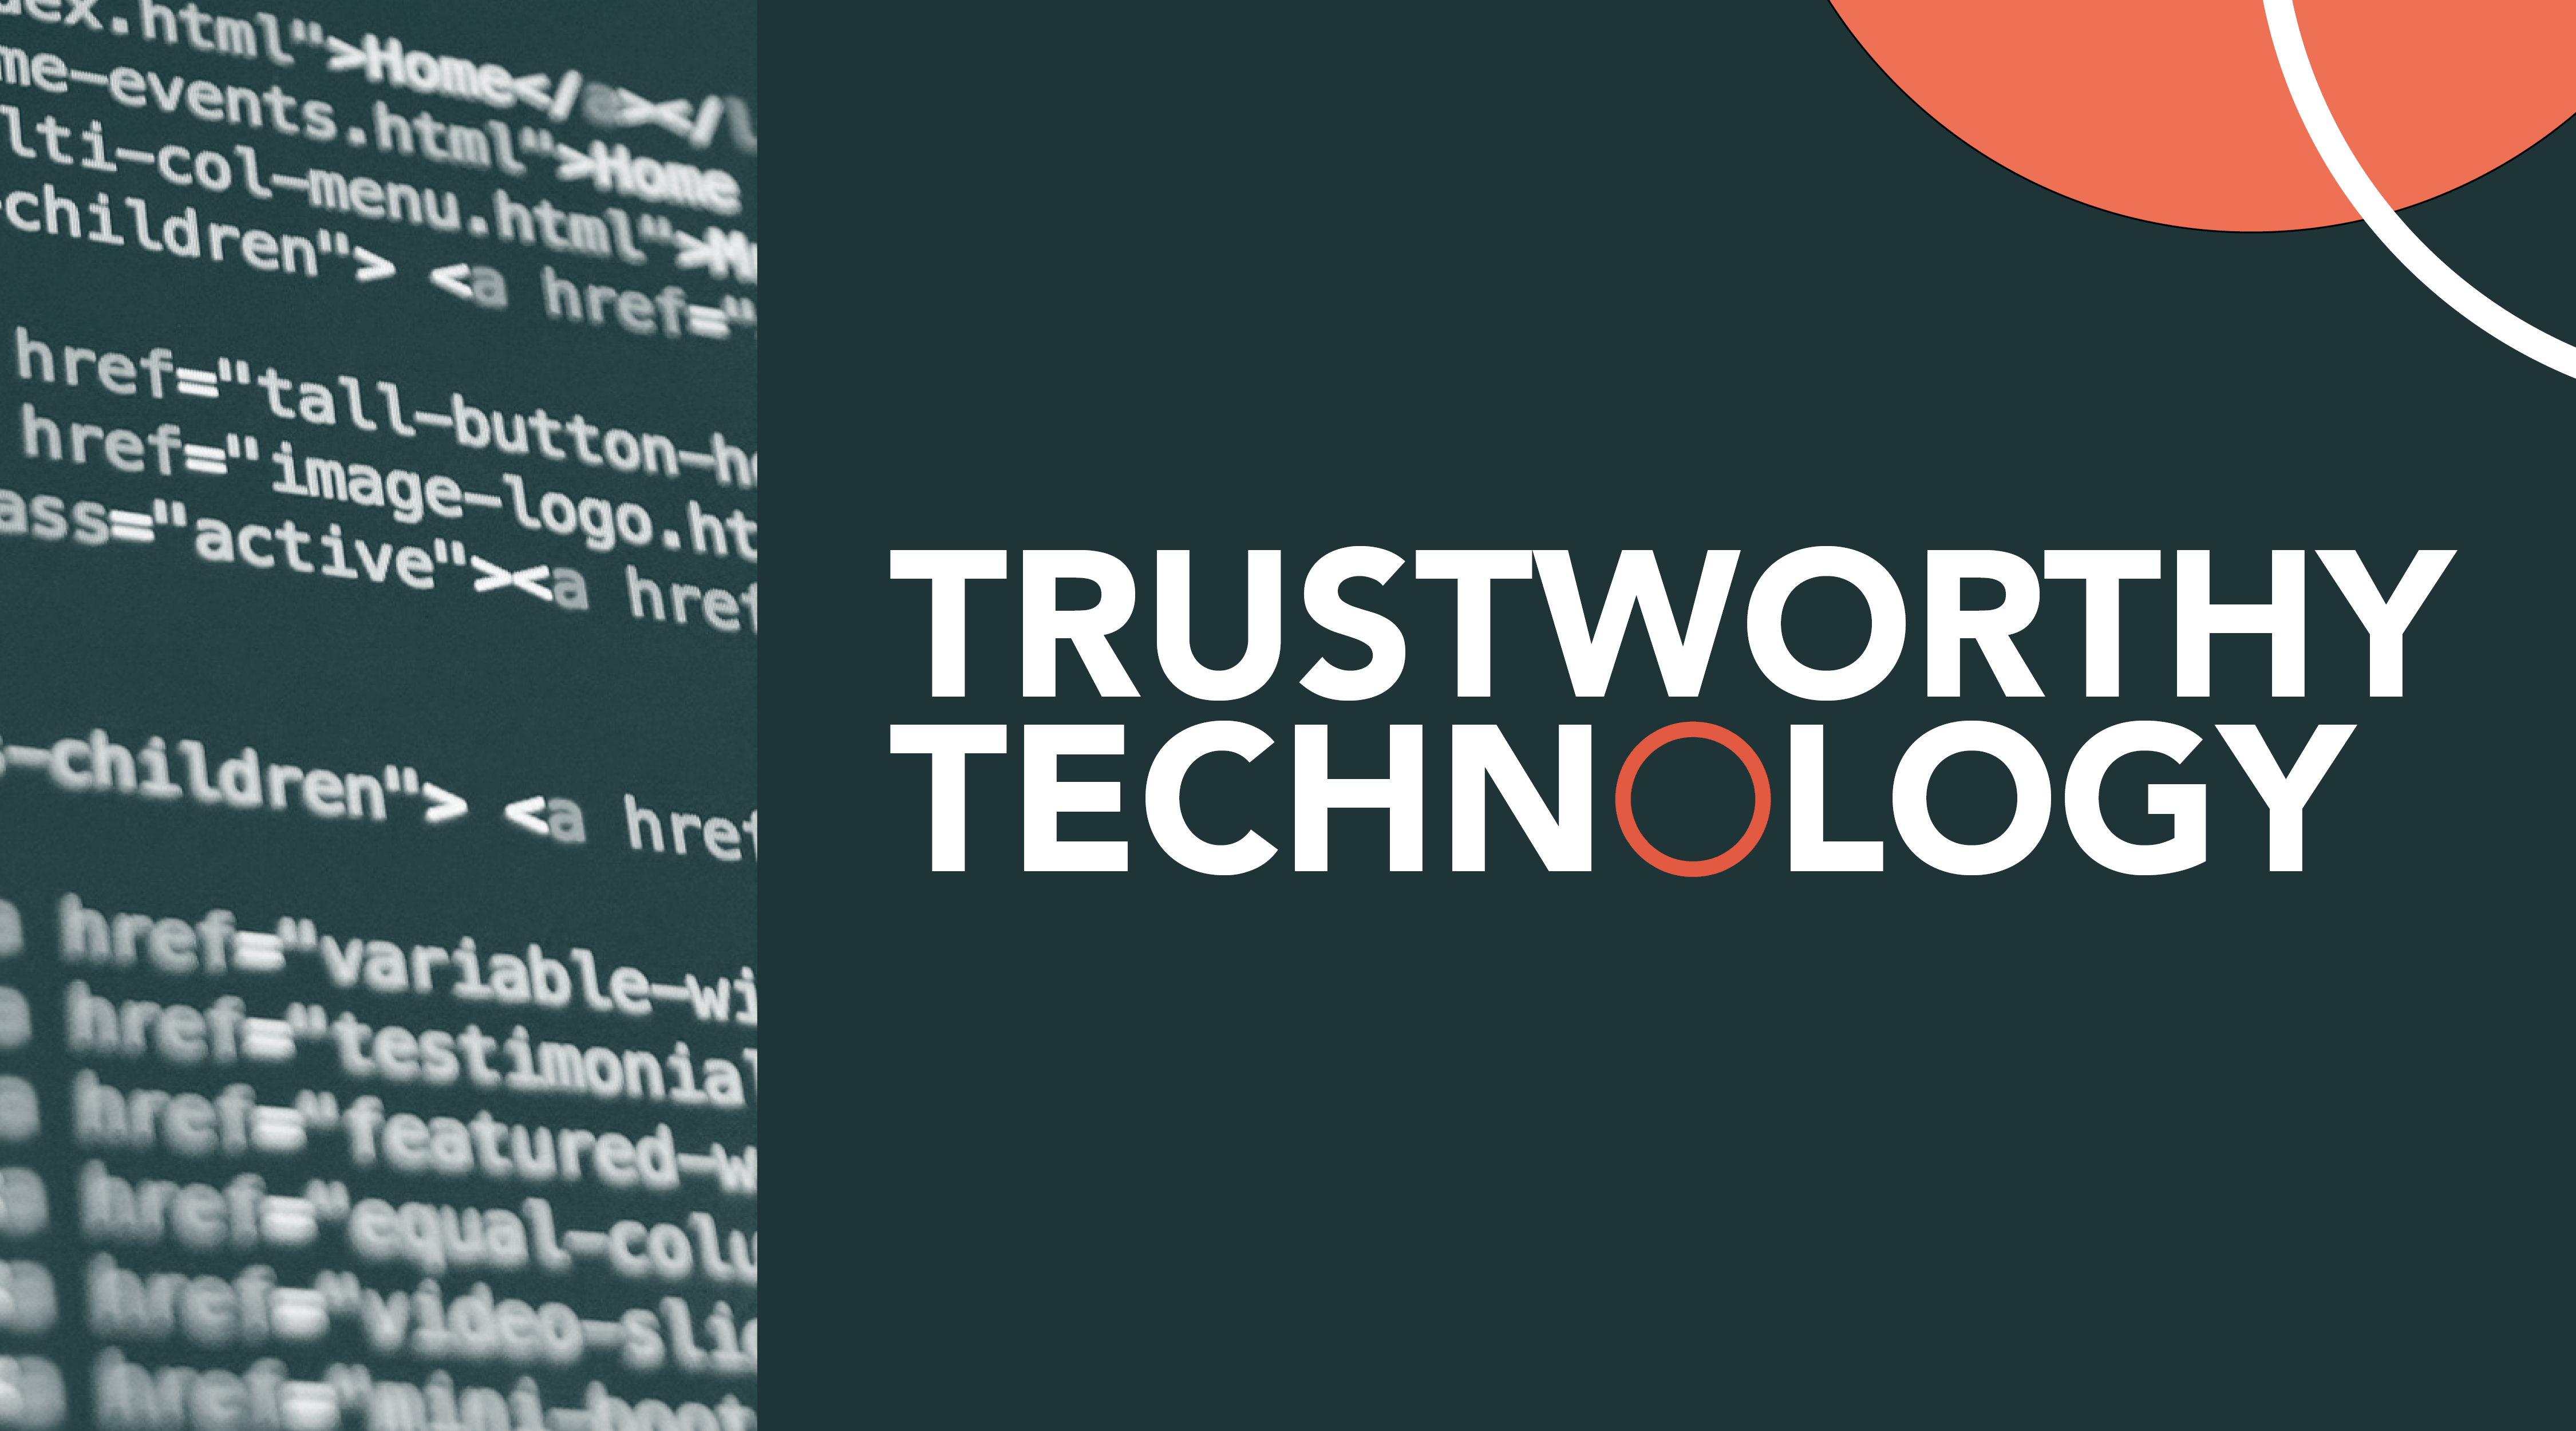 More Trustworthy Technology, for which technological progress aligns with the needs and values of citizens